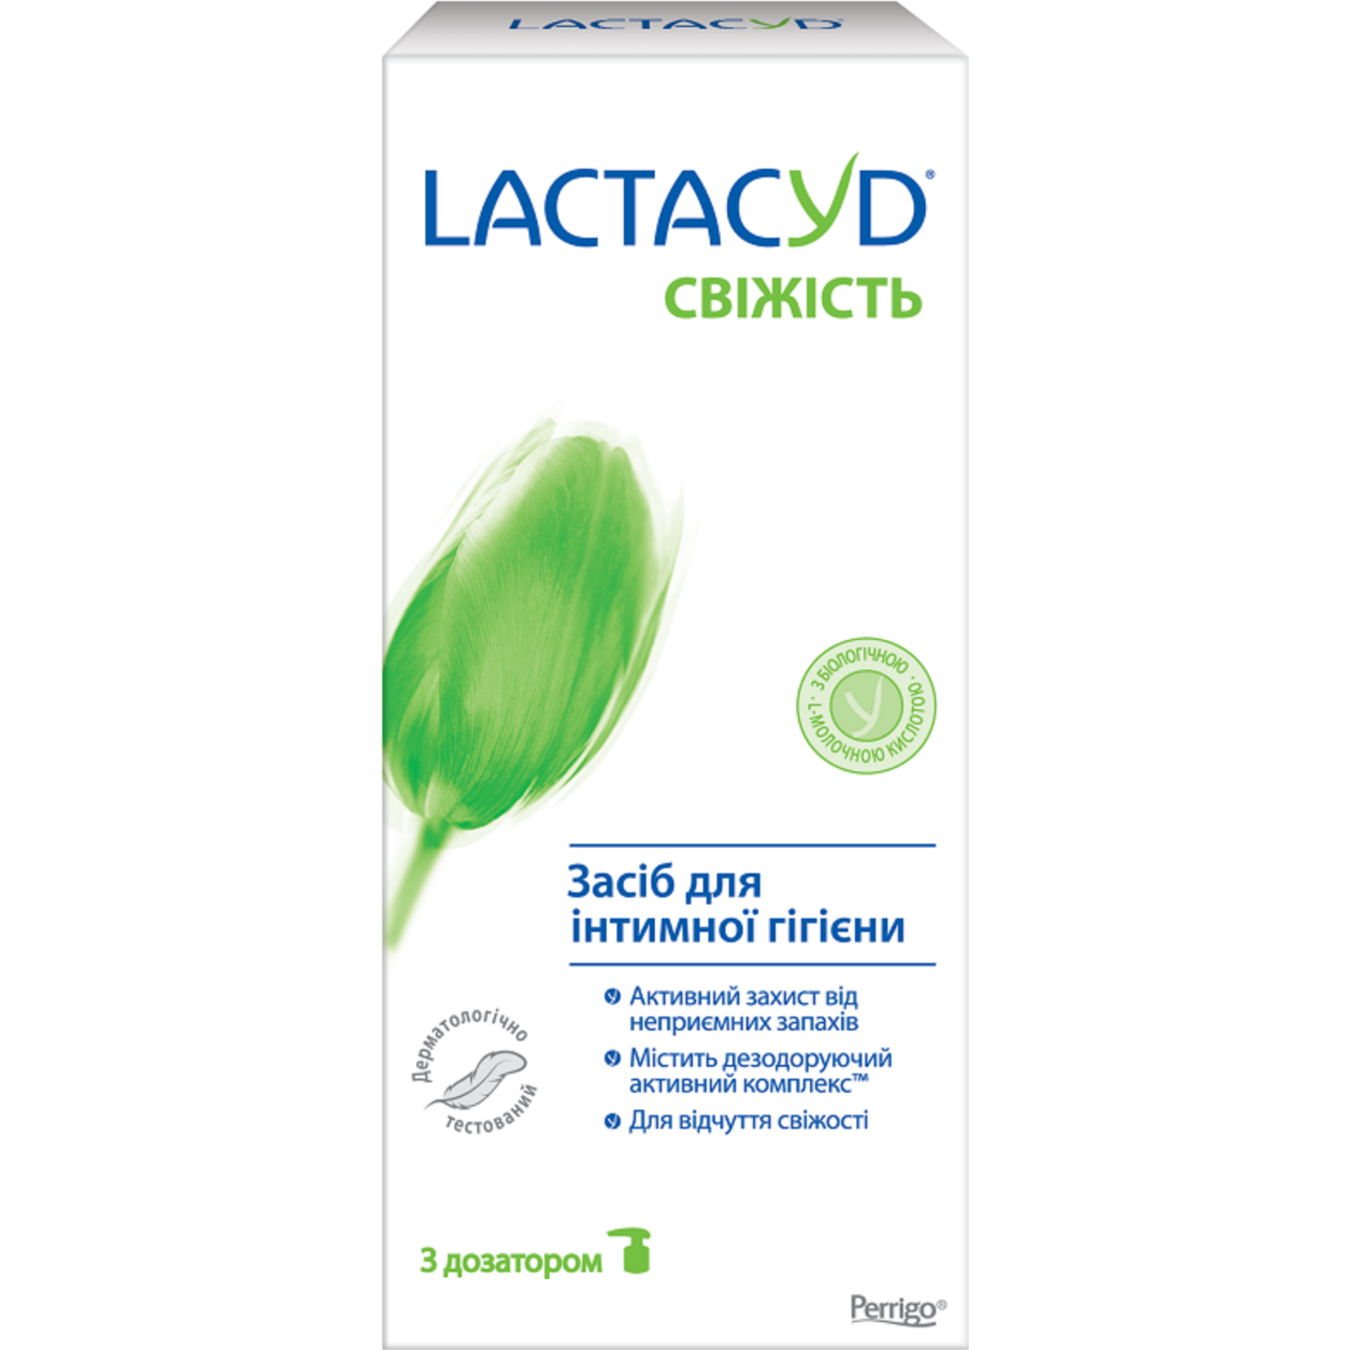 Lactacyd Fresh With Dispenser For Intimate Hygiene Gel 200ml